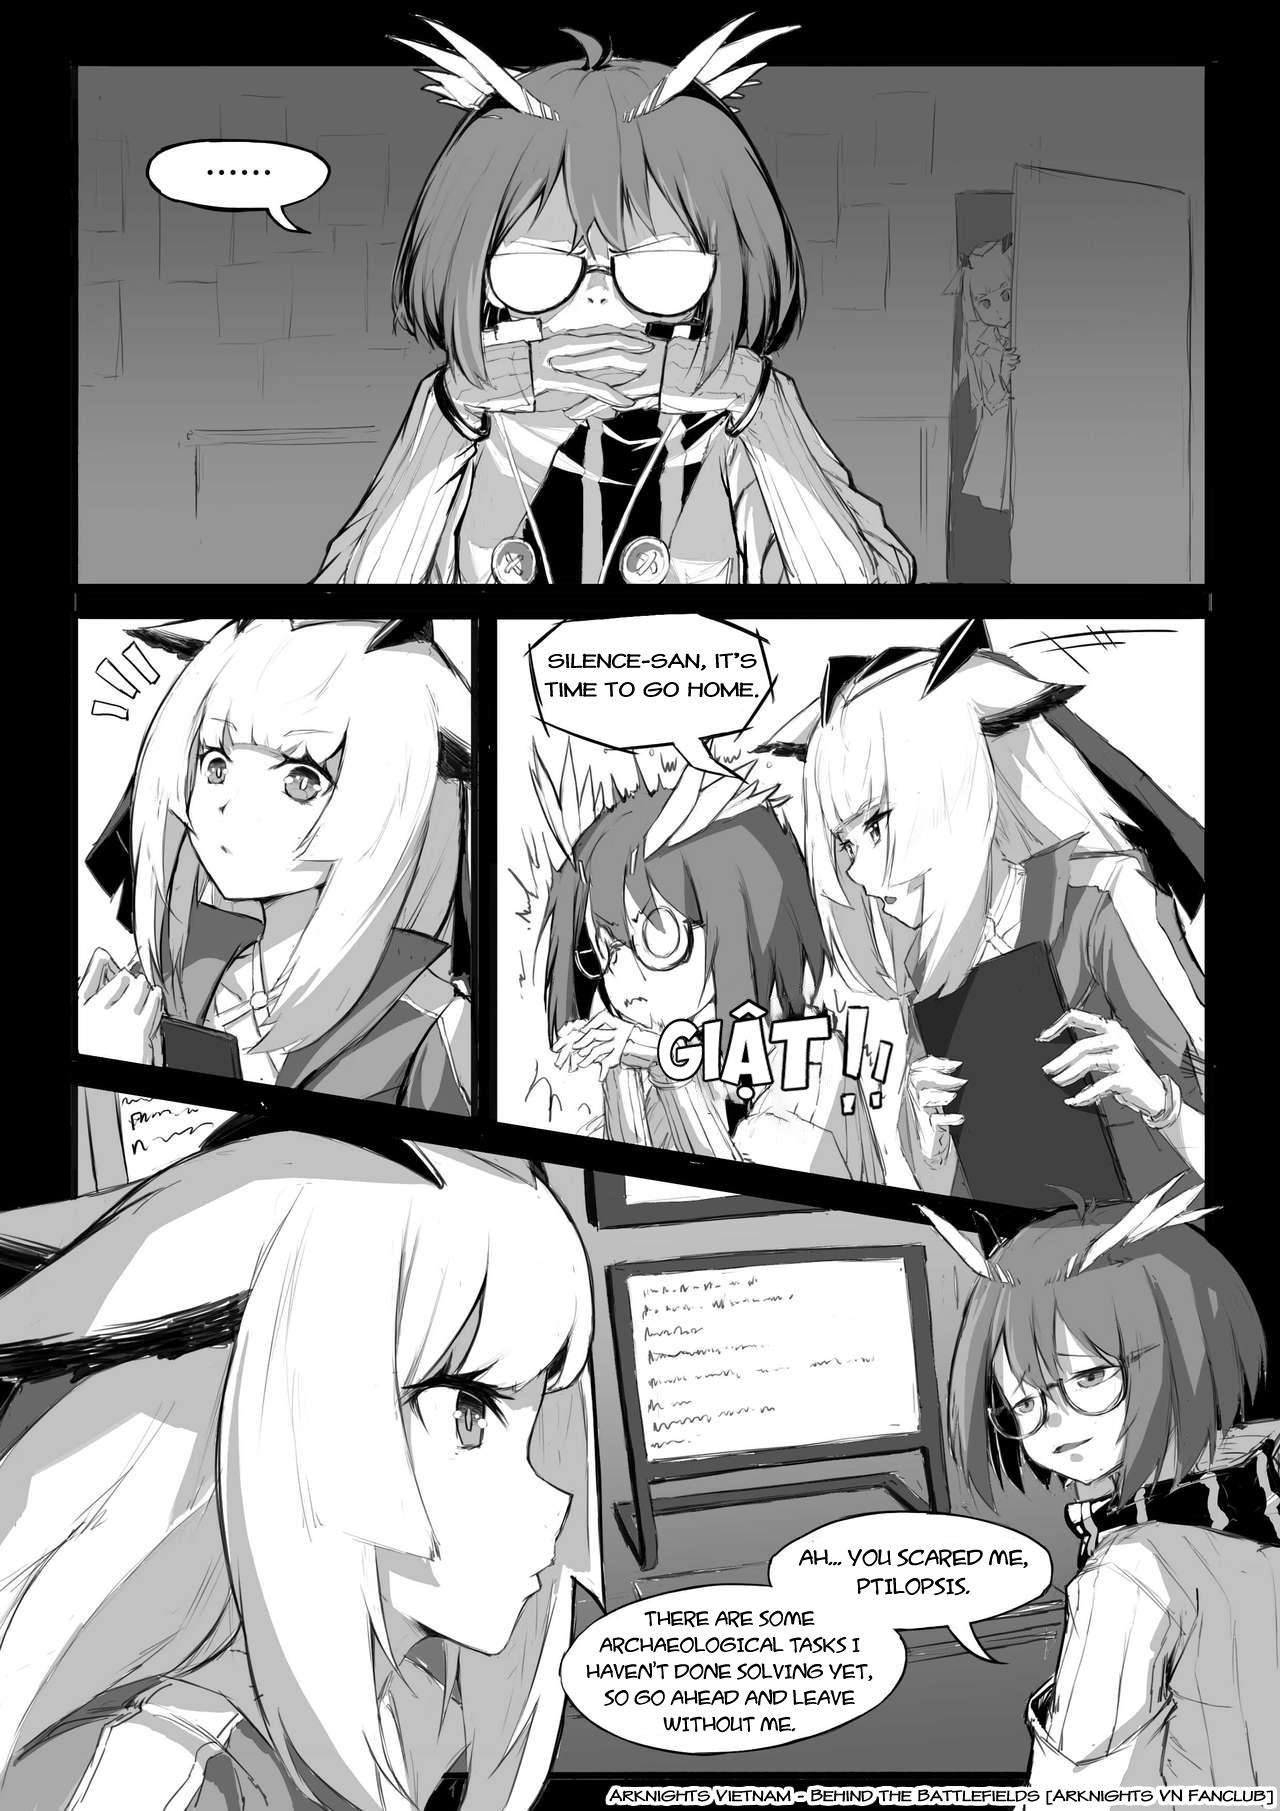 Stepmom The Story Where Ptilopsis Becomes A Very Little Girl - Arknights Cocks - Page 2